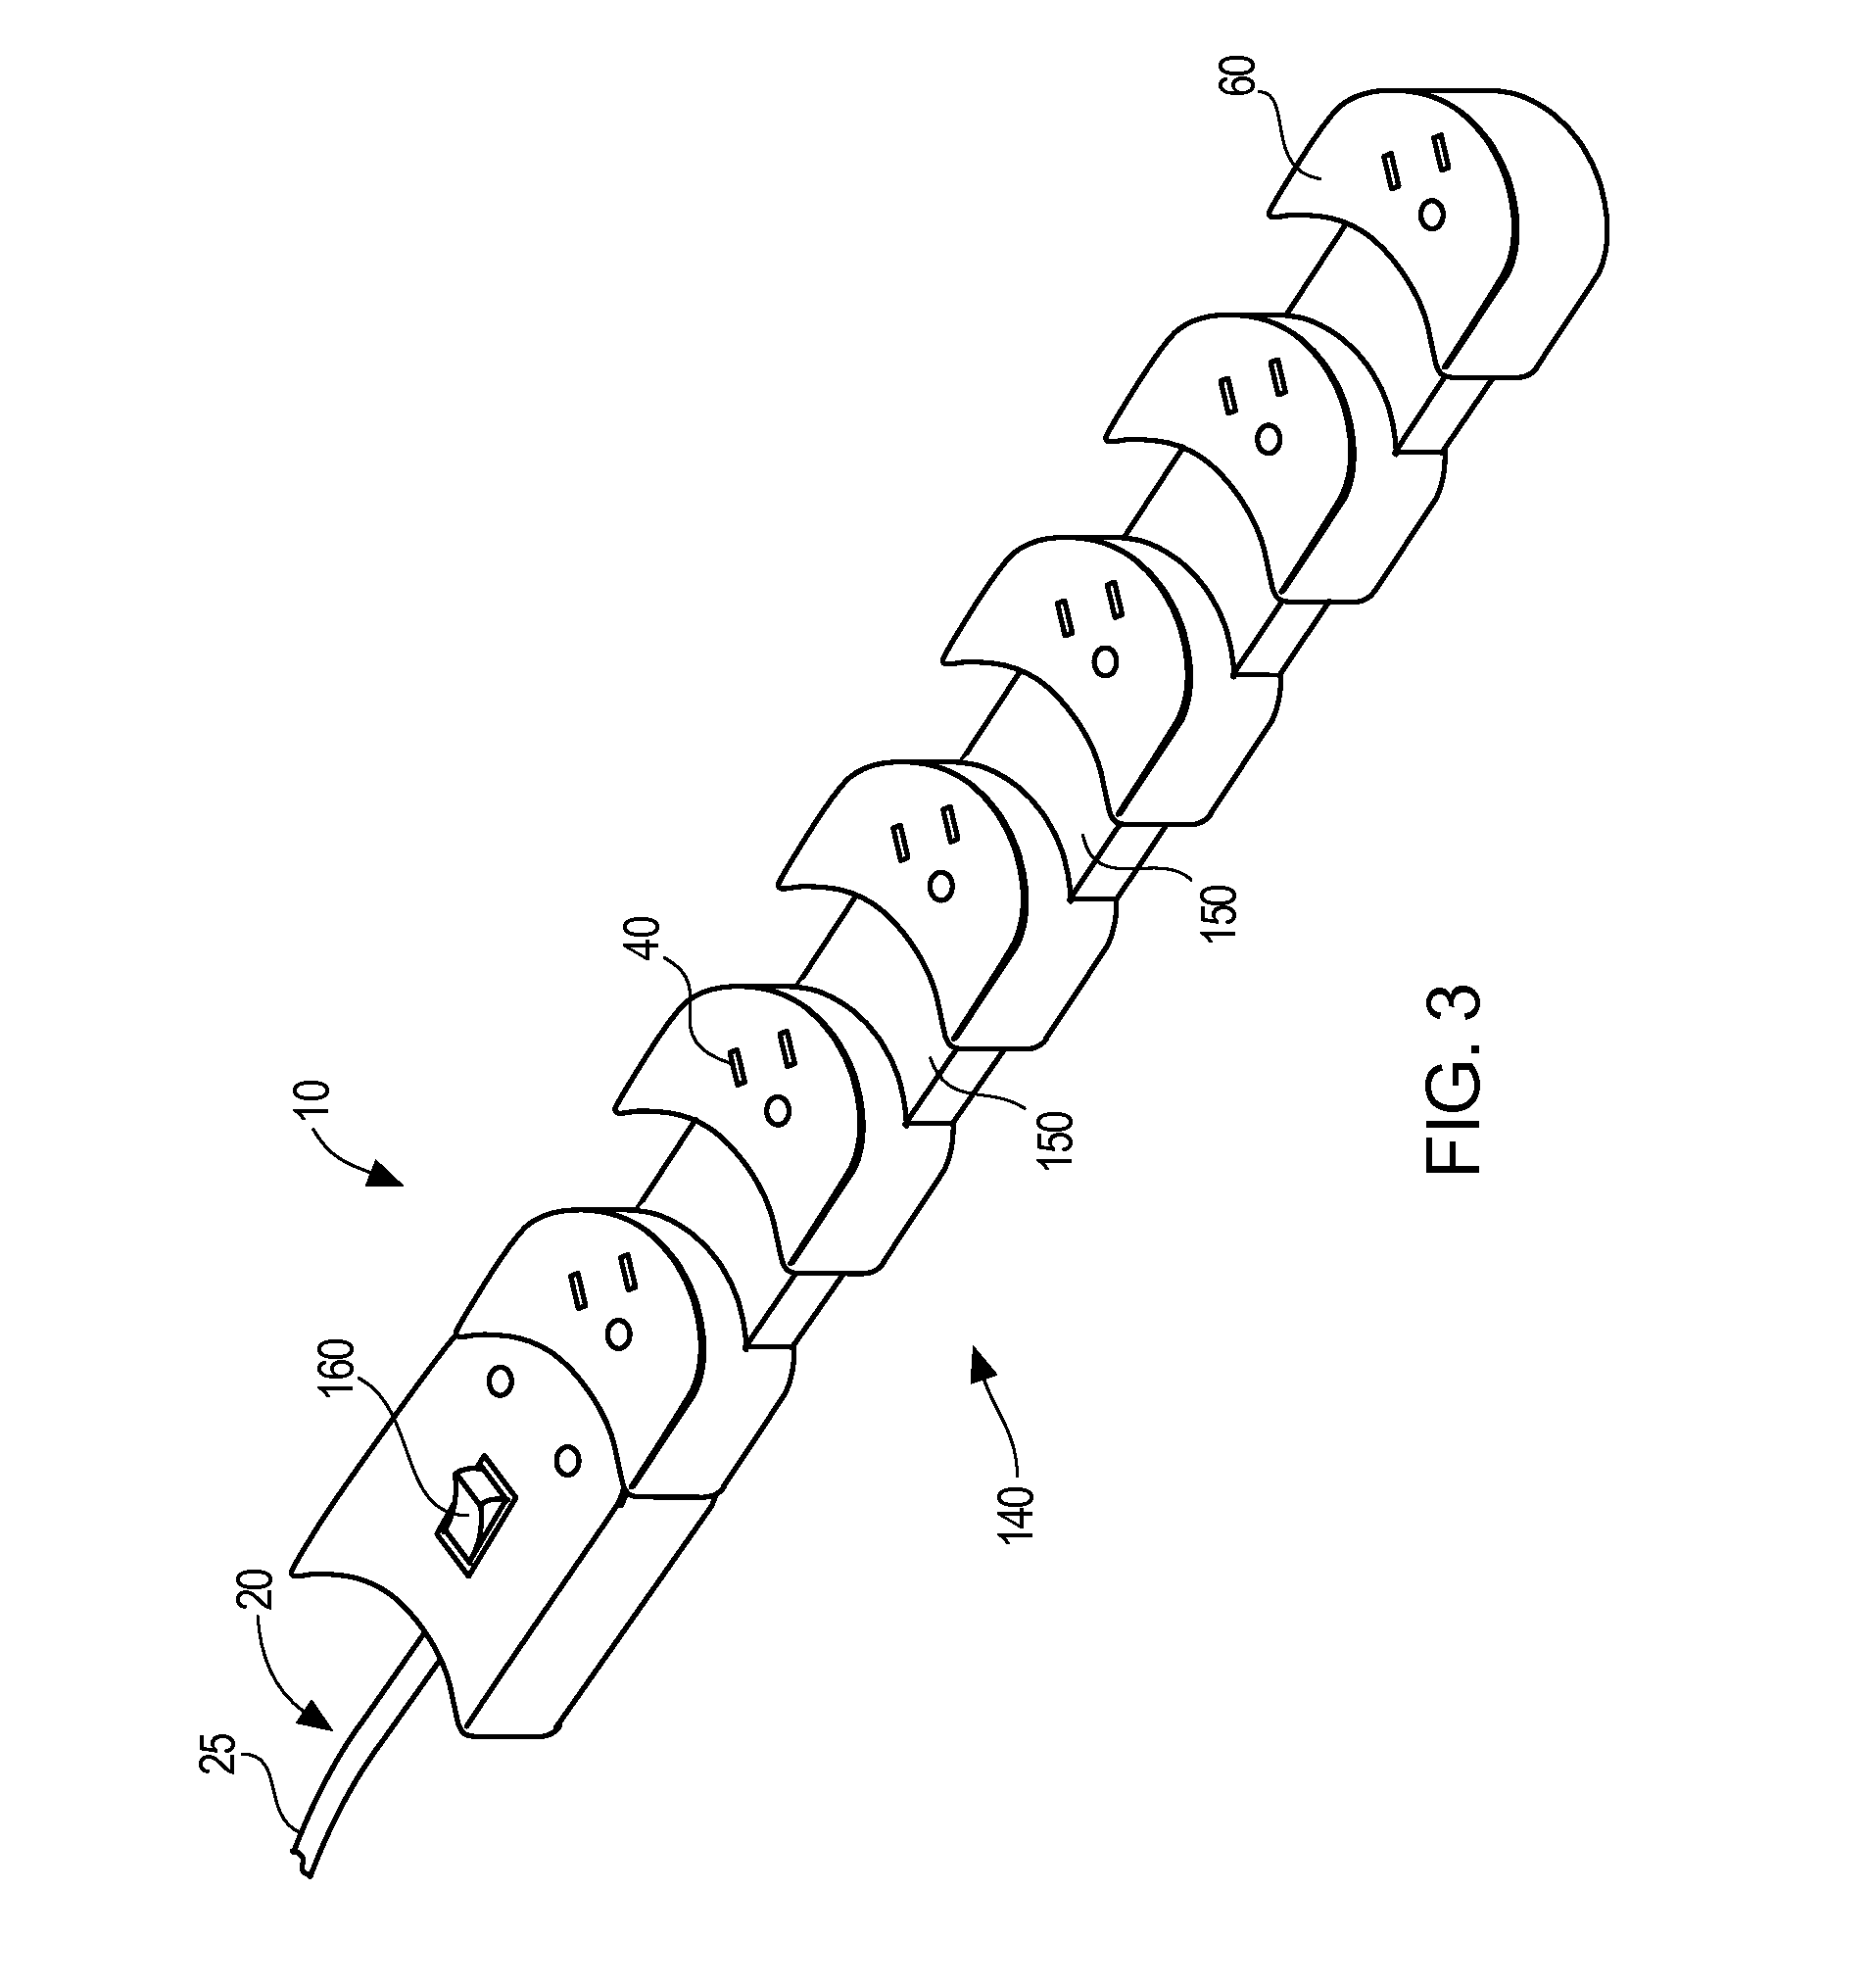 Expanding space saving electrical power connection device